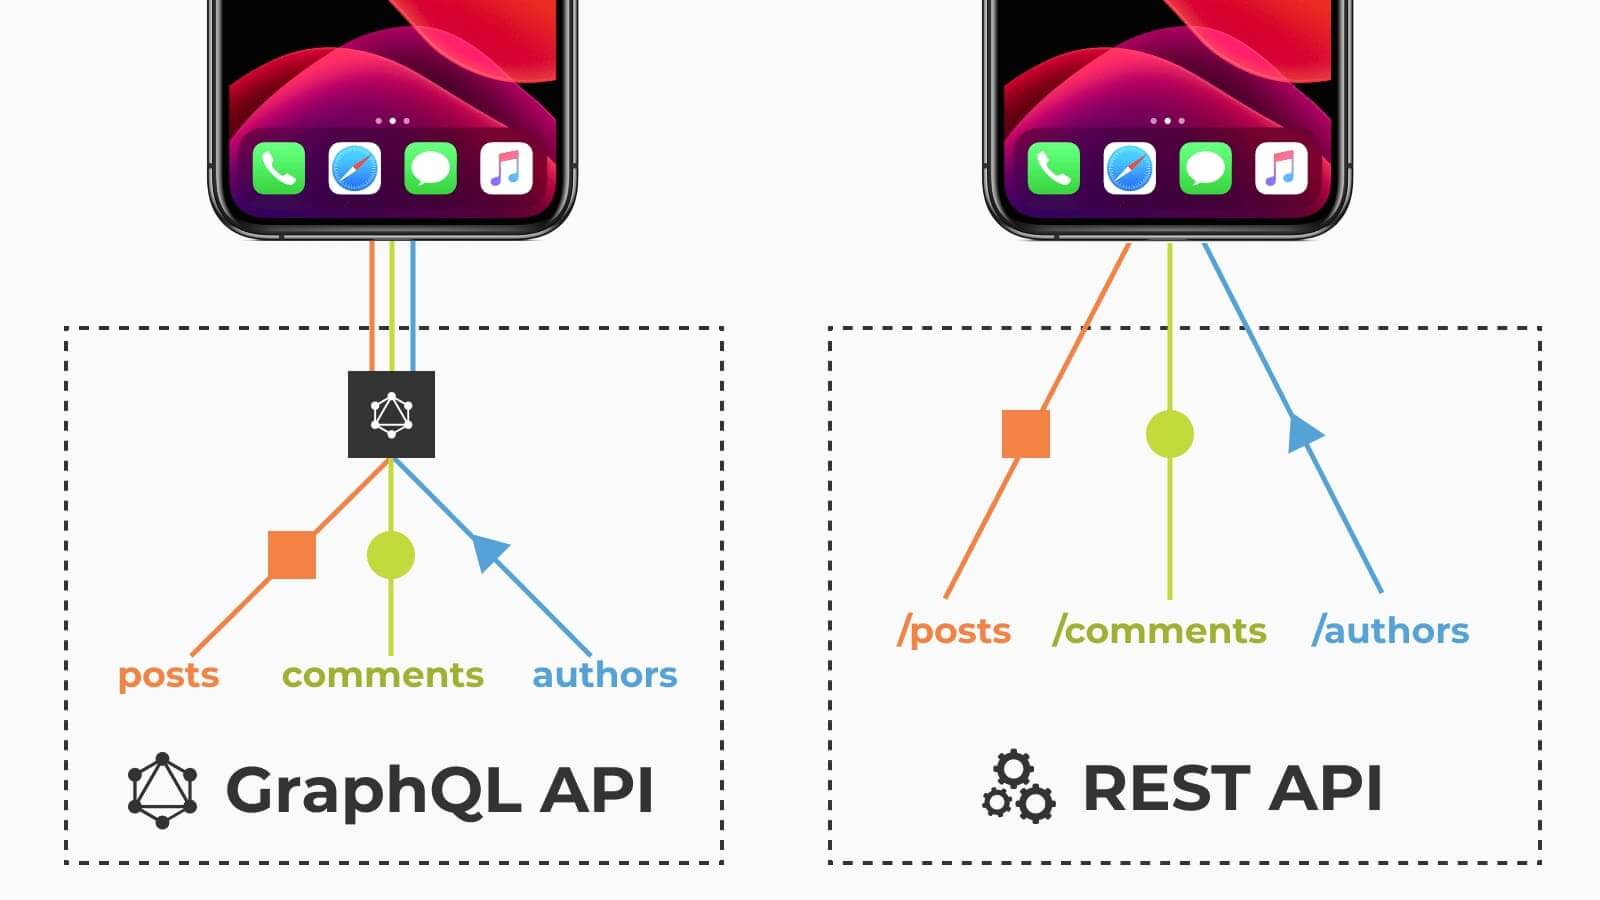 A diagram depicting the difference between a GraphQL and REST request